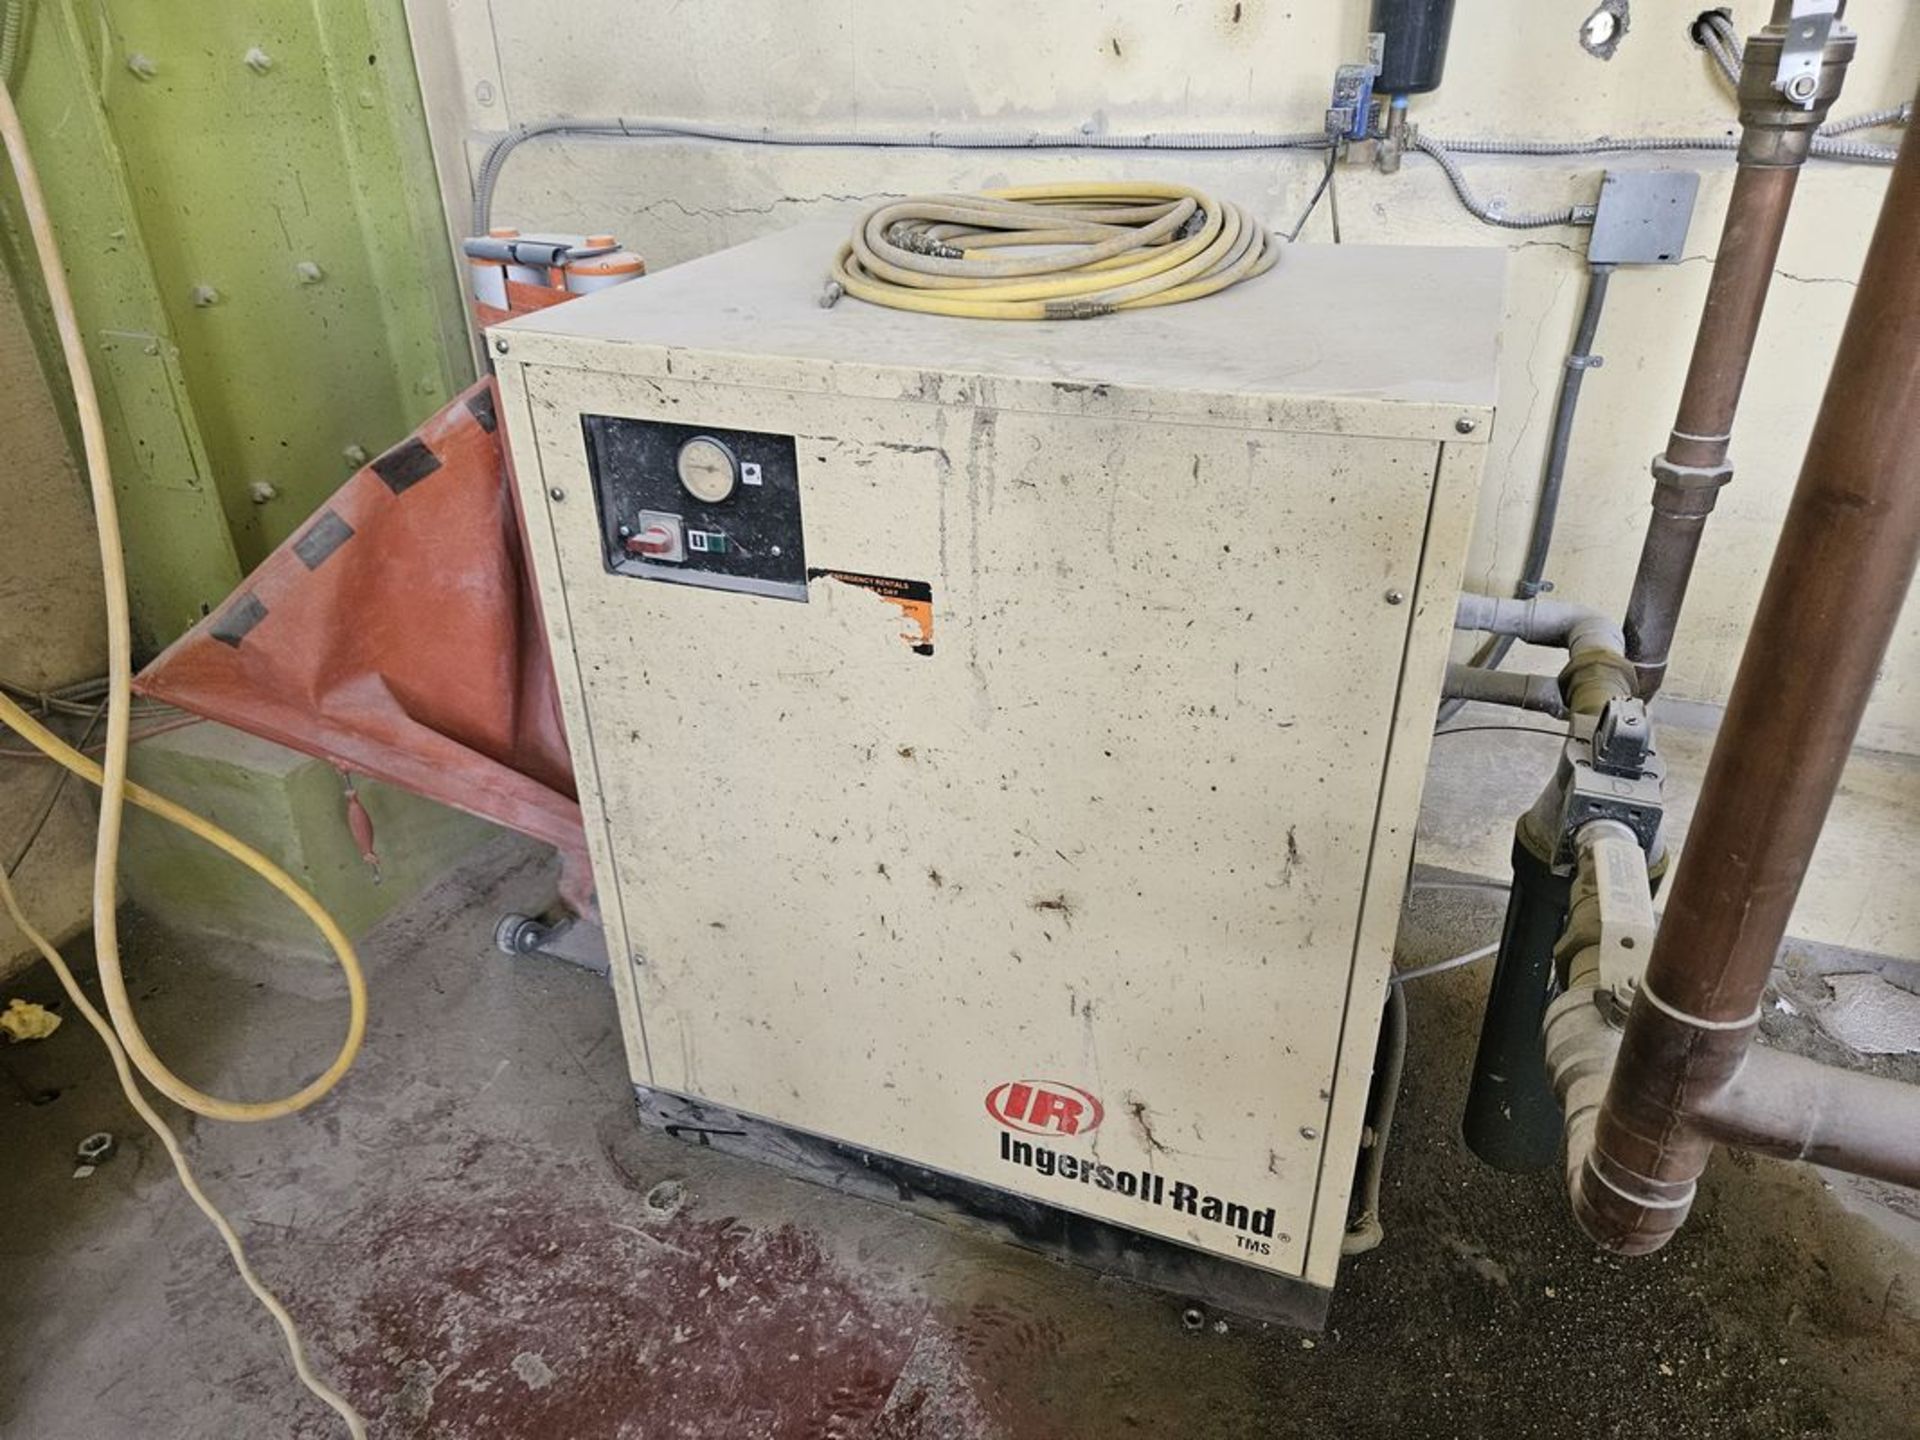 Ingersoll Rand TMS0280 Air Dryer (Delayed Delivery - June 24th)